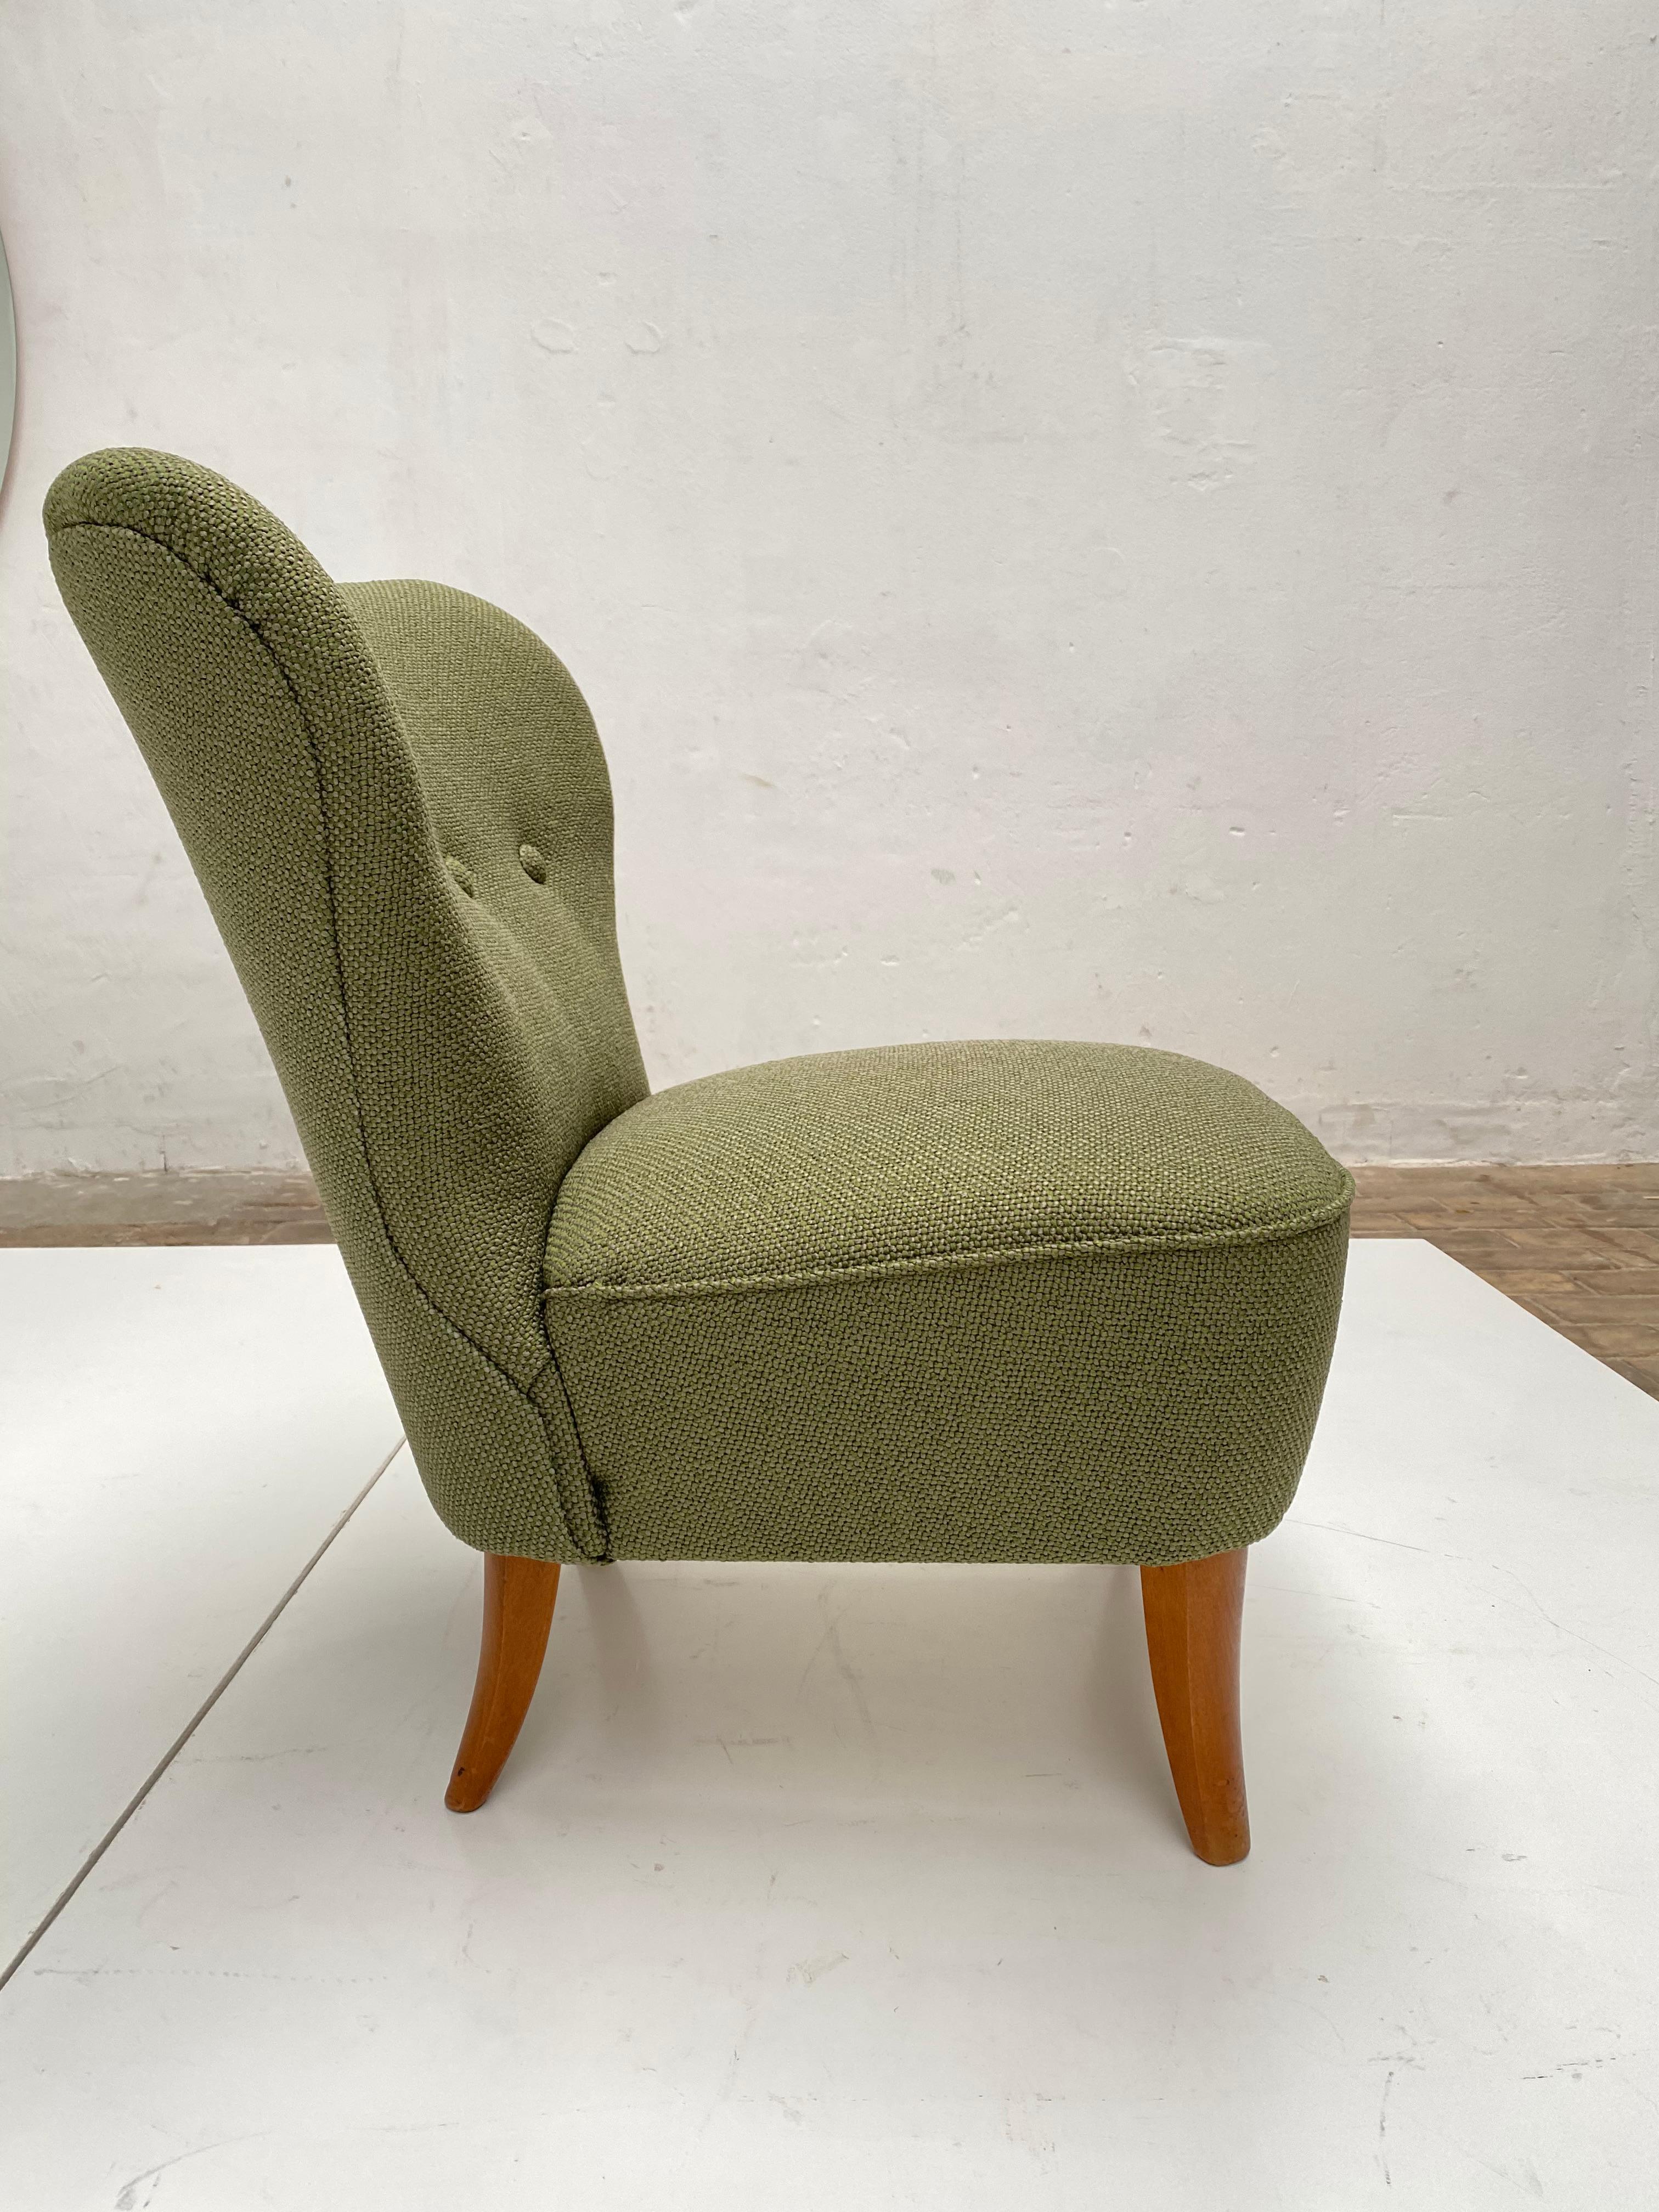 Mid-20th Century New Upholstered Ploeg Wool Lounge Chair by Tijsseling, the Netherlands, 1950s